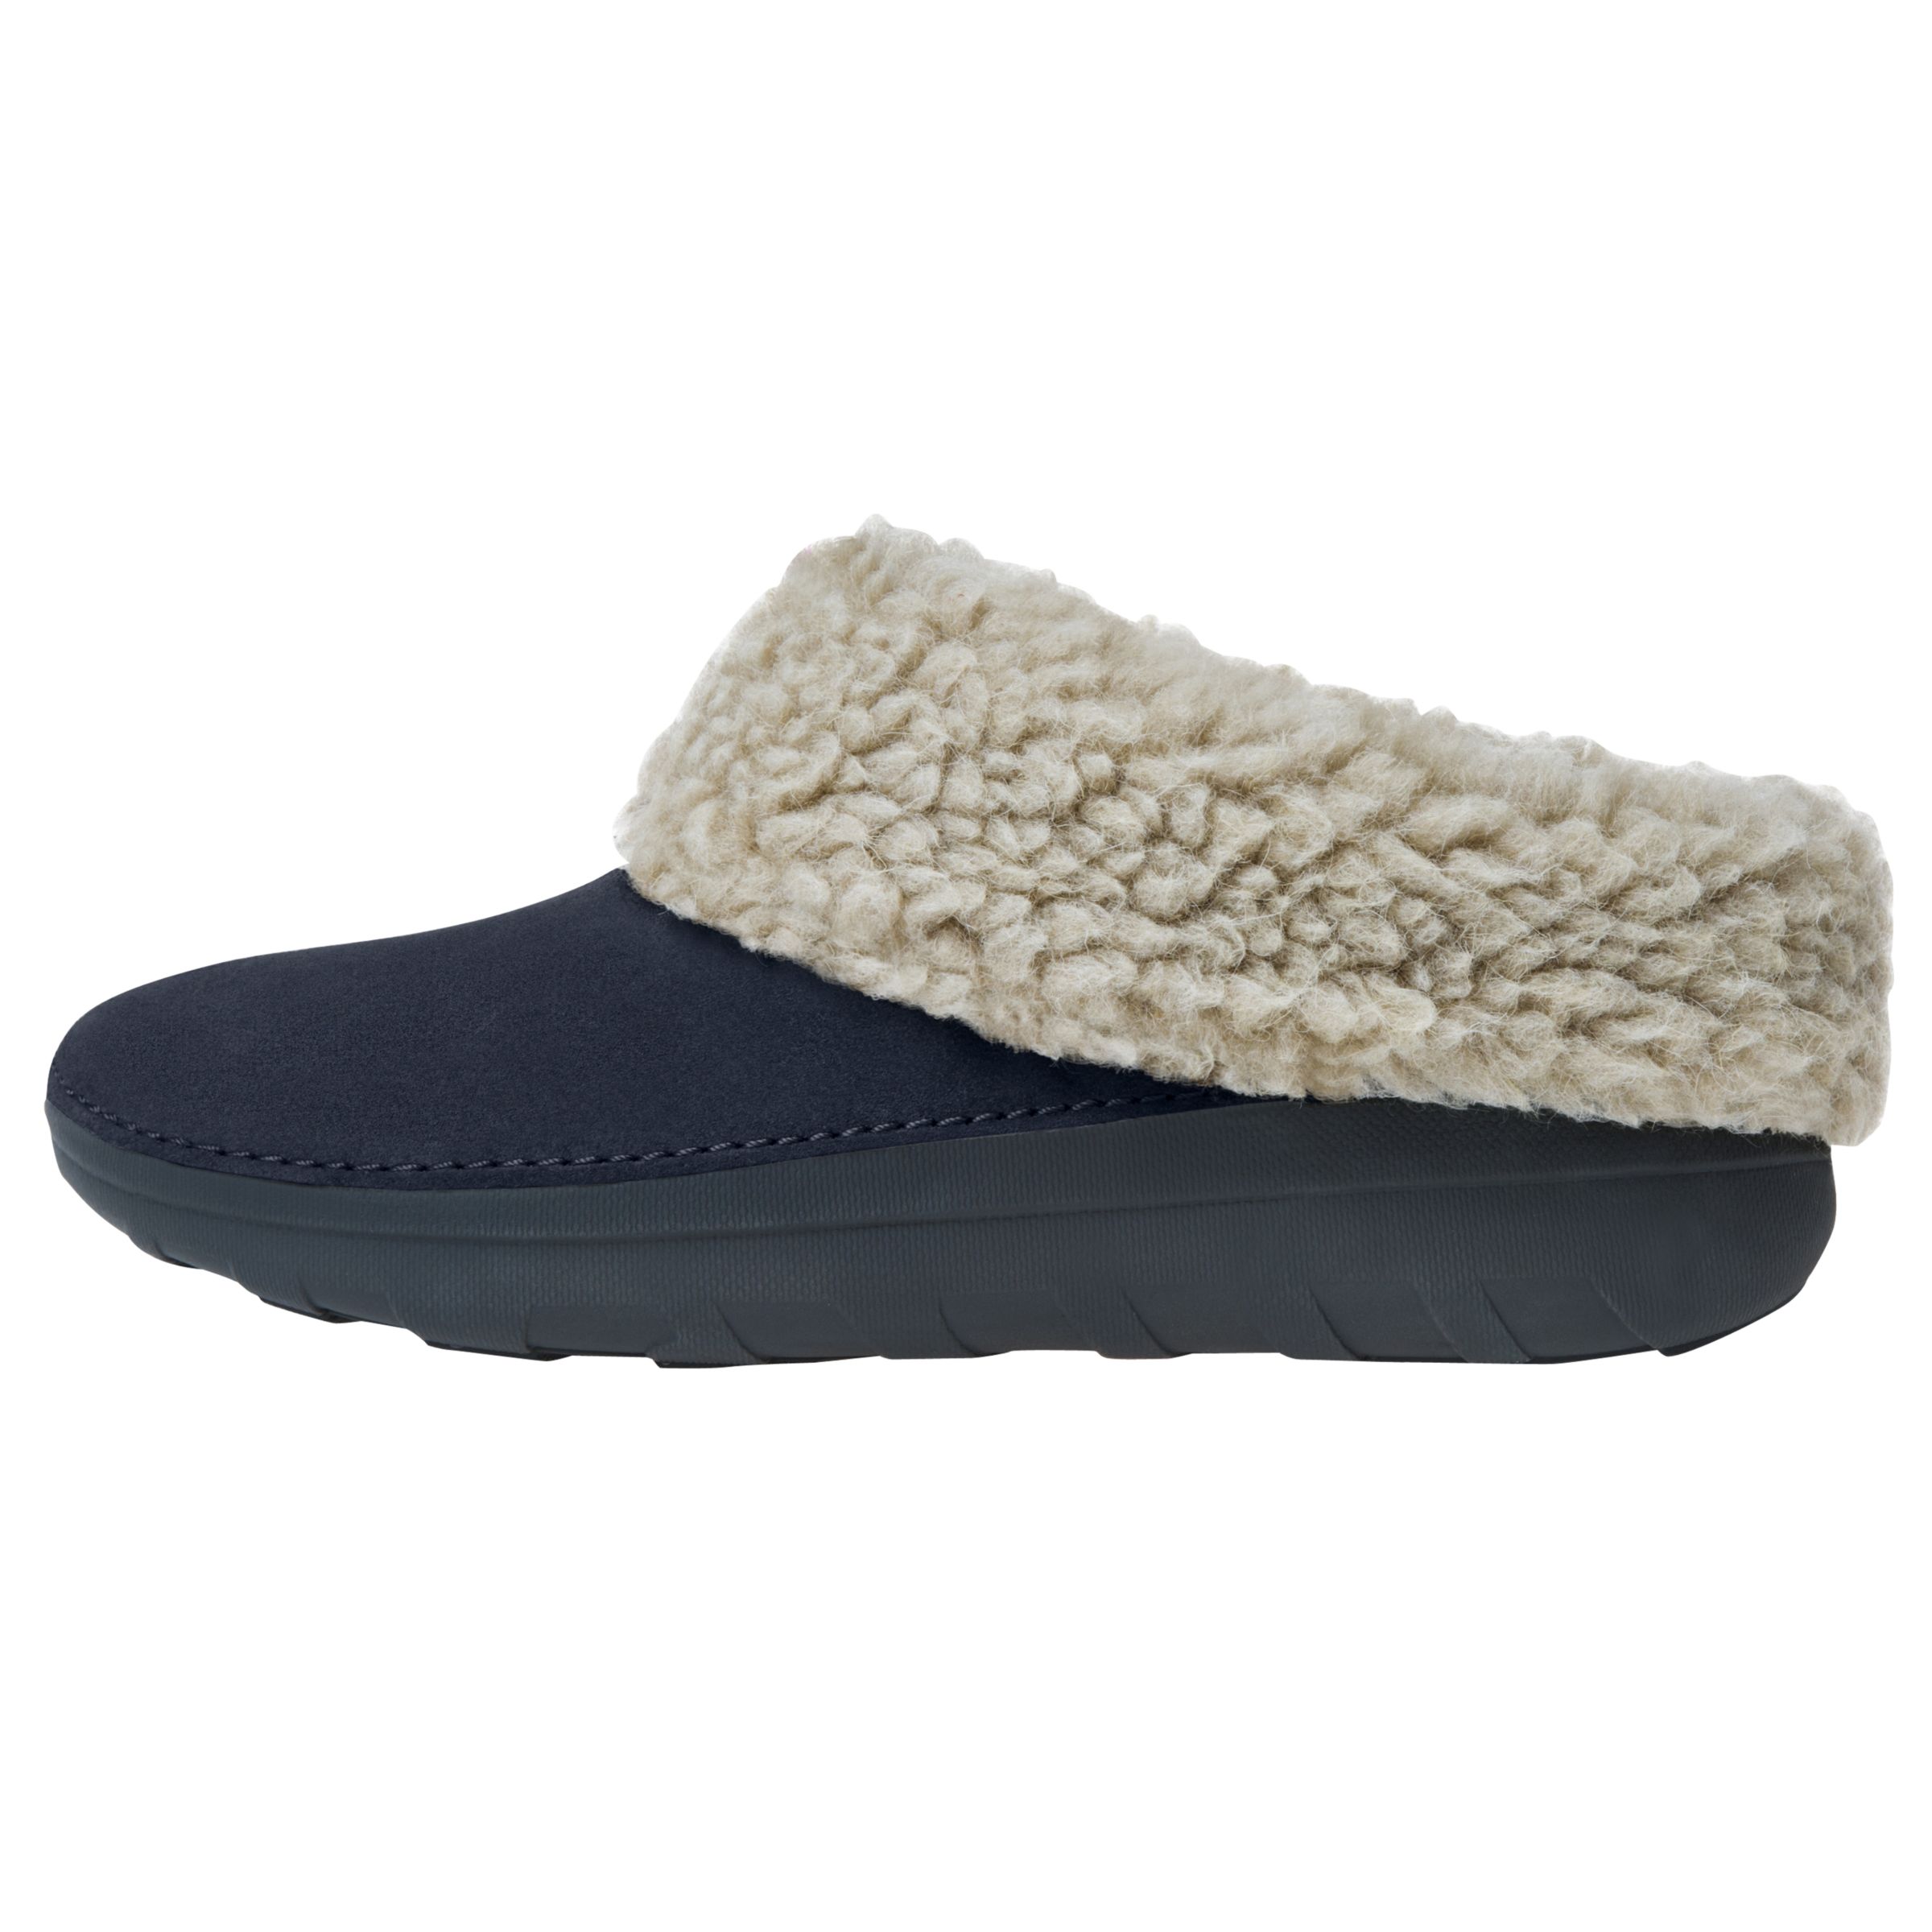 Fitflop Loaff Snug Slippers